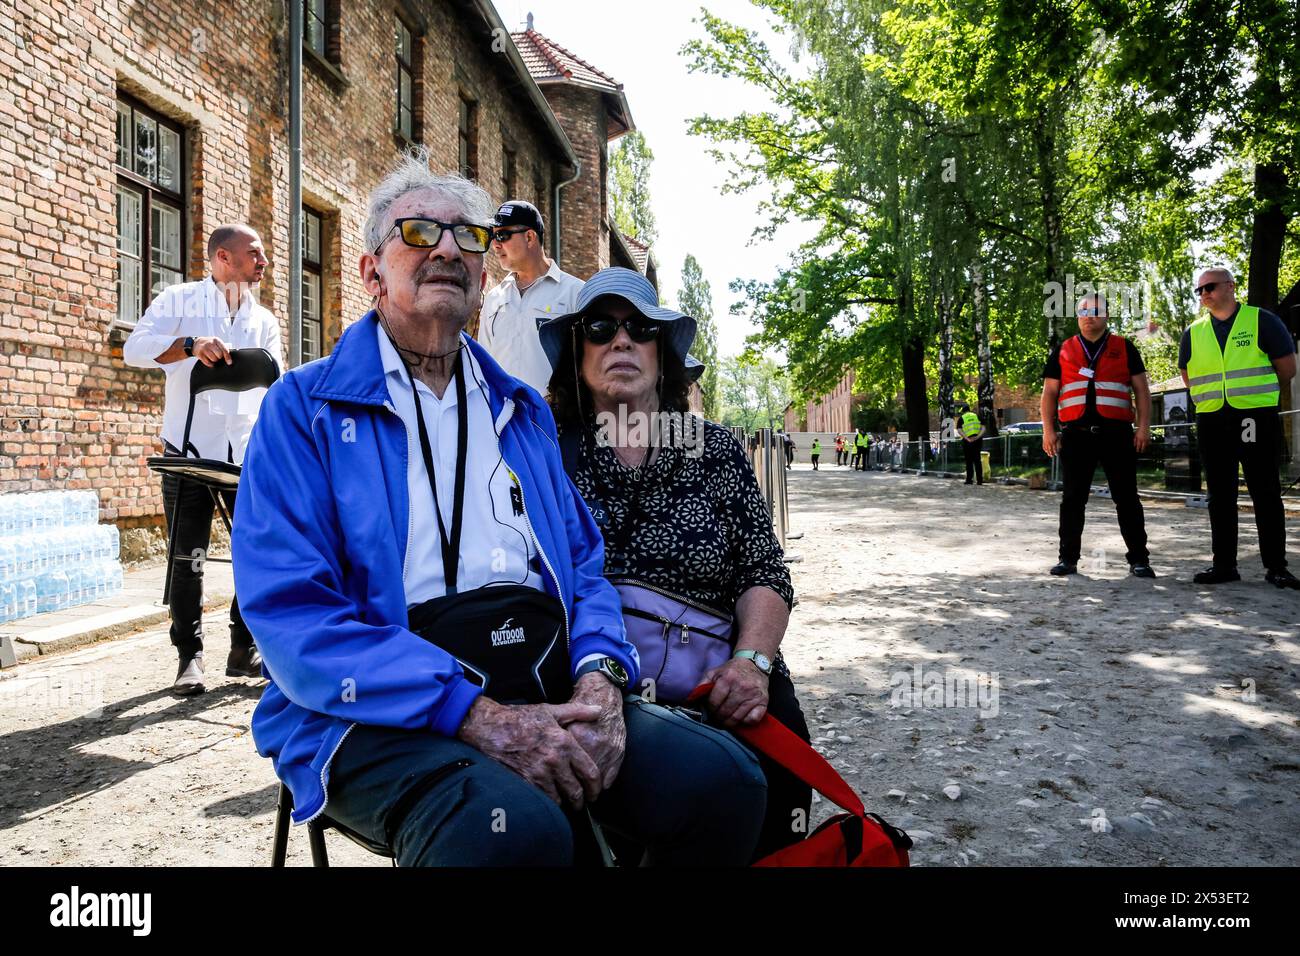 Elderly Holocaust survivors rest as they arrive for the March of the Living at Auschwitz Camp gate 'Work Makes you Free', with 55 holocaust survivors. Holocaust survivors and October 7th survivors attend the March of the Living together with a delegation from, among others, the United States, Canada, Italy, United Kingdom. On Holocaust Memorial Day observed in the Jewish calendar (Yom HaShoah), thousands of participants march silently from Auschwitz to Birkenau. The march has an educational and remembrance purpose. This year's March was highly politicized due to the Israeli war in Occupied Pal Stock Photo